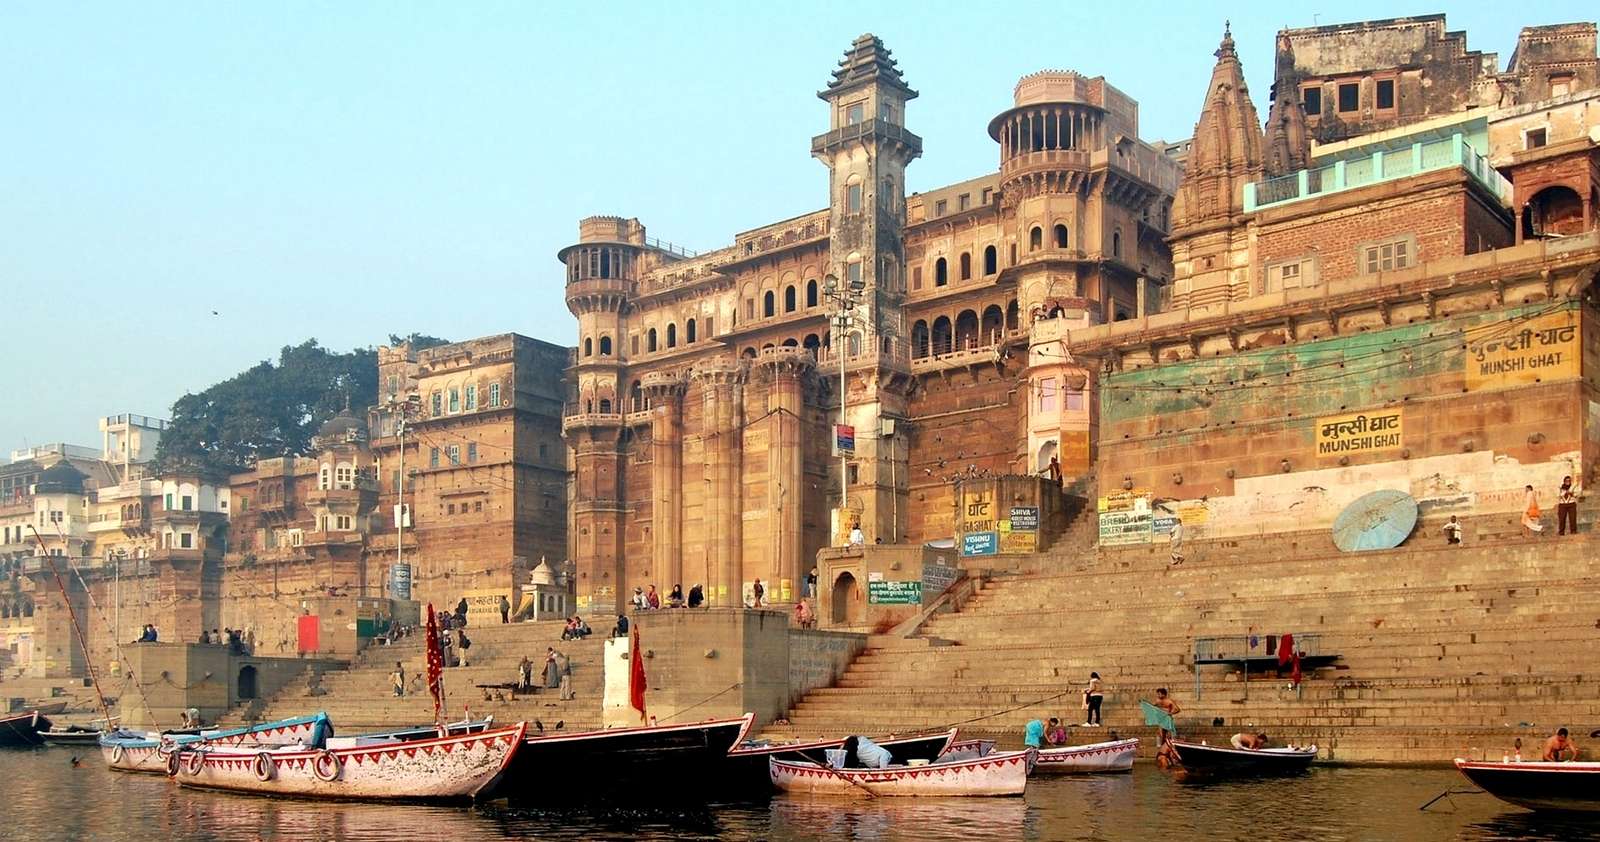 Buildings of India jigsaw puzzle online